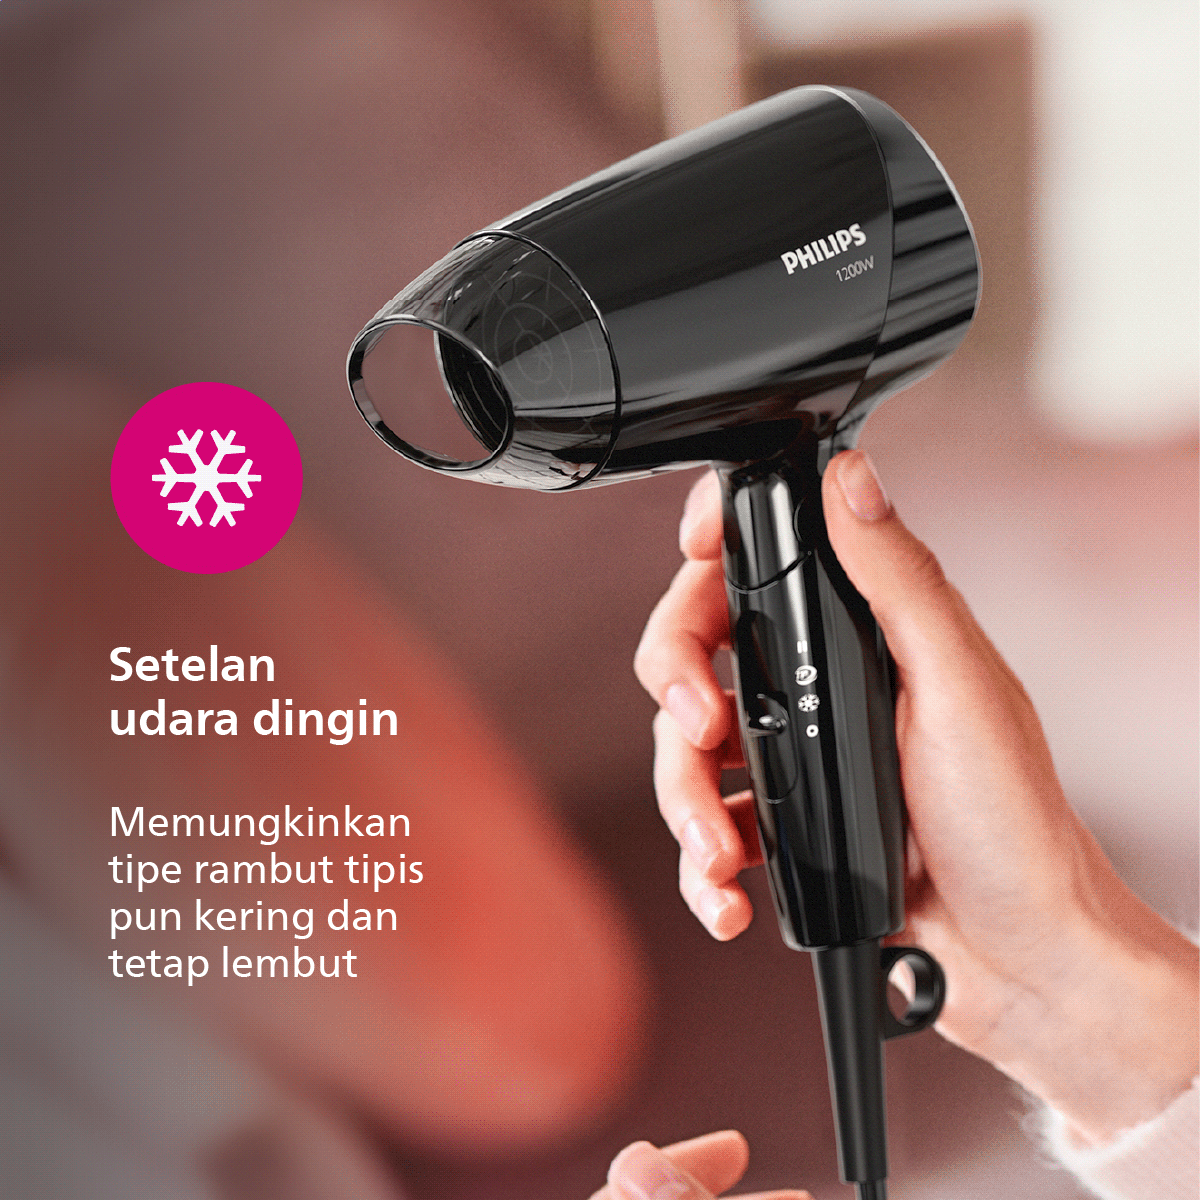 Philips Hair Dryer Essential Care BHC010/12 Pengering Rambut - 4